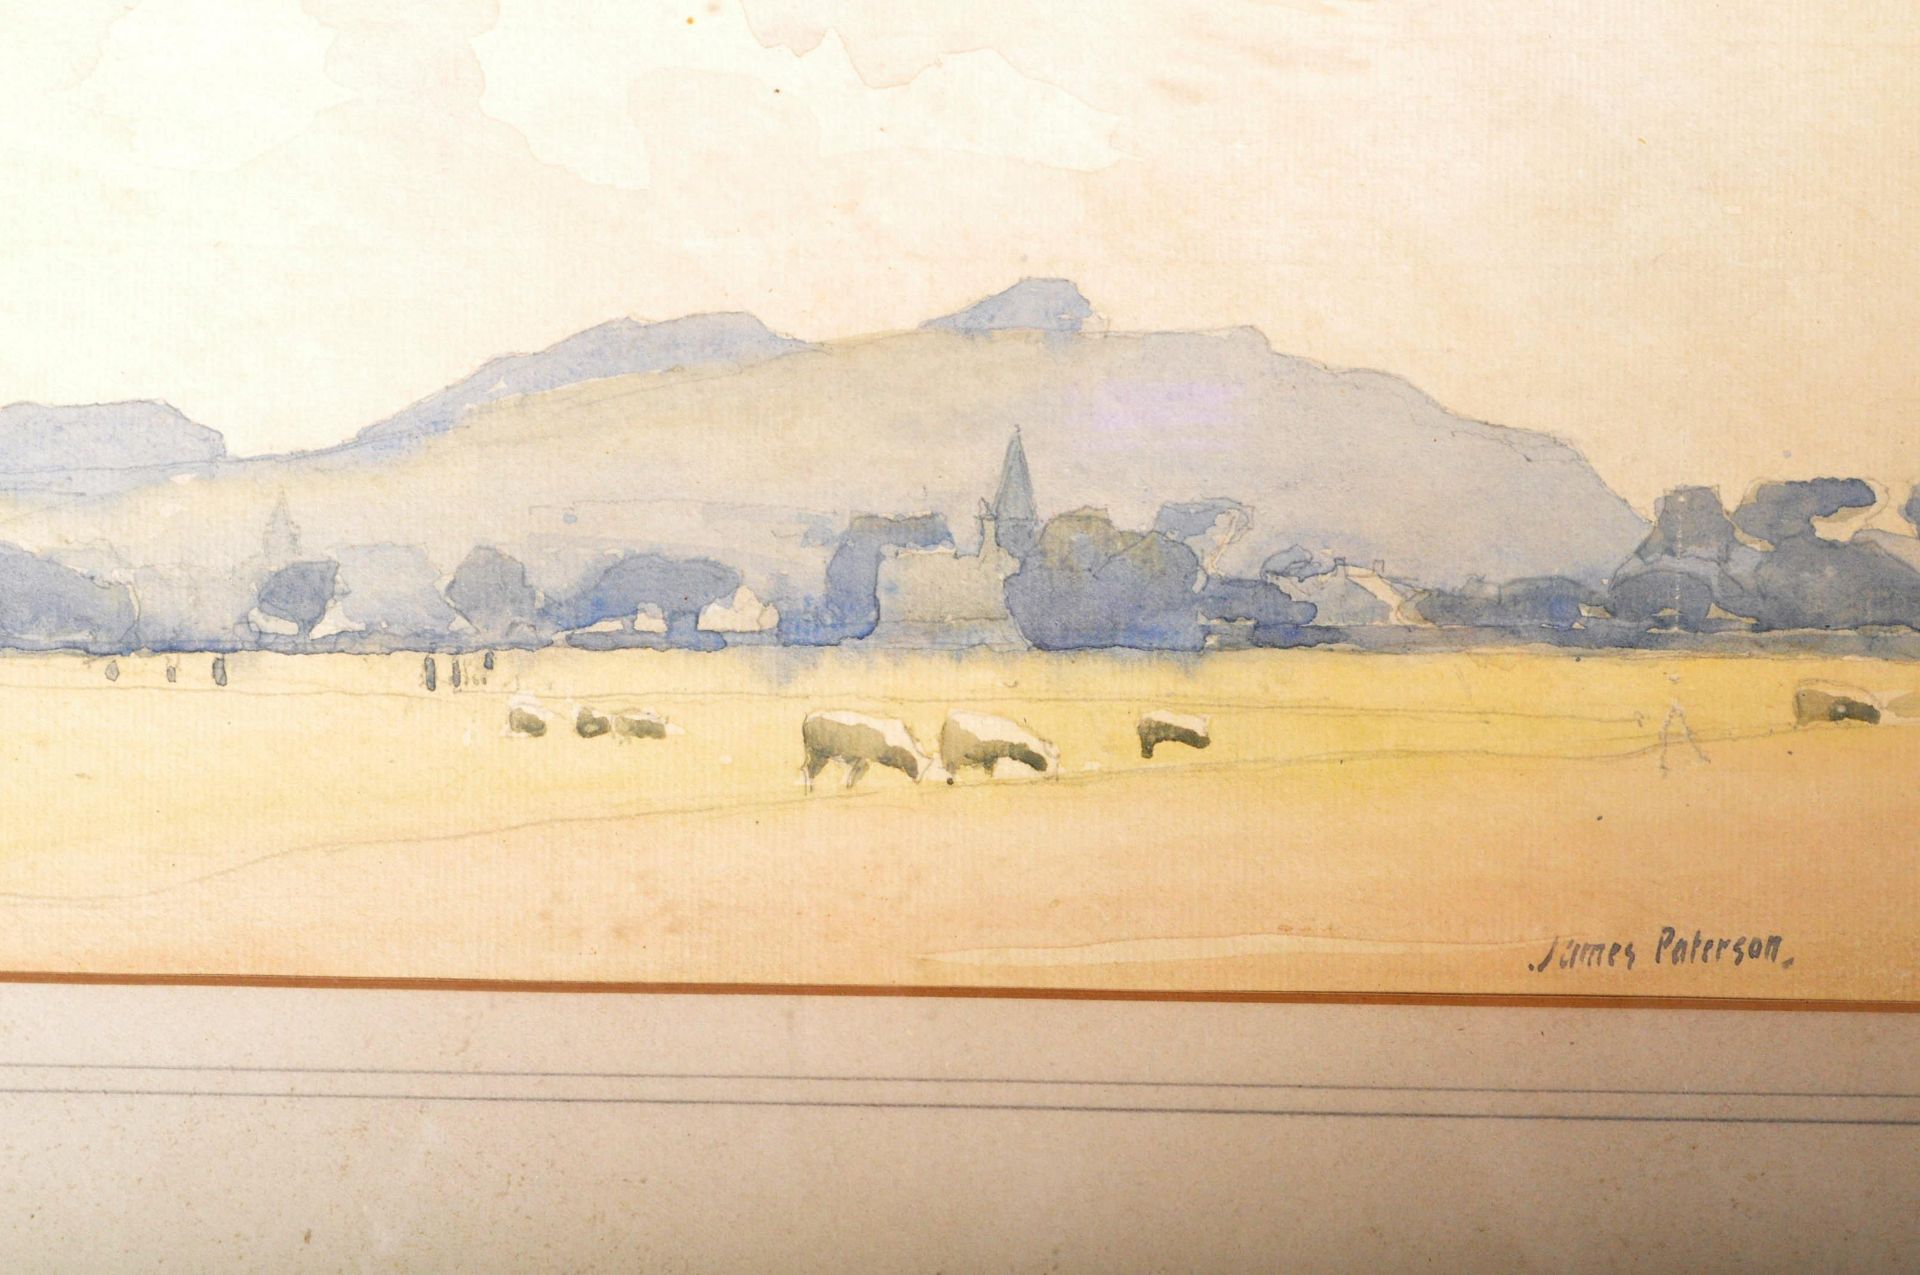 JAMES PATTERSON - SCOTTISH WATERCOLOUR PAINTING - Image 4 of 6